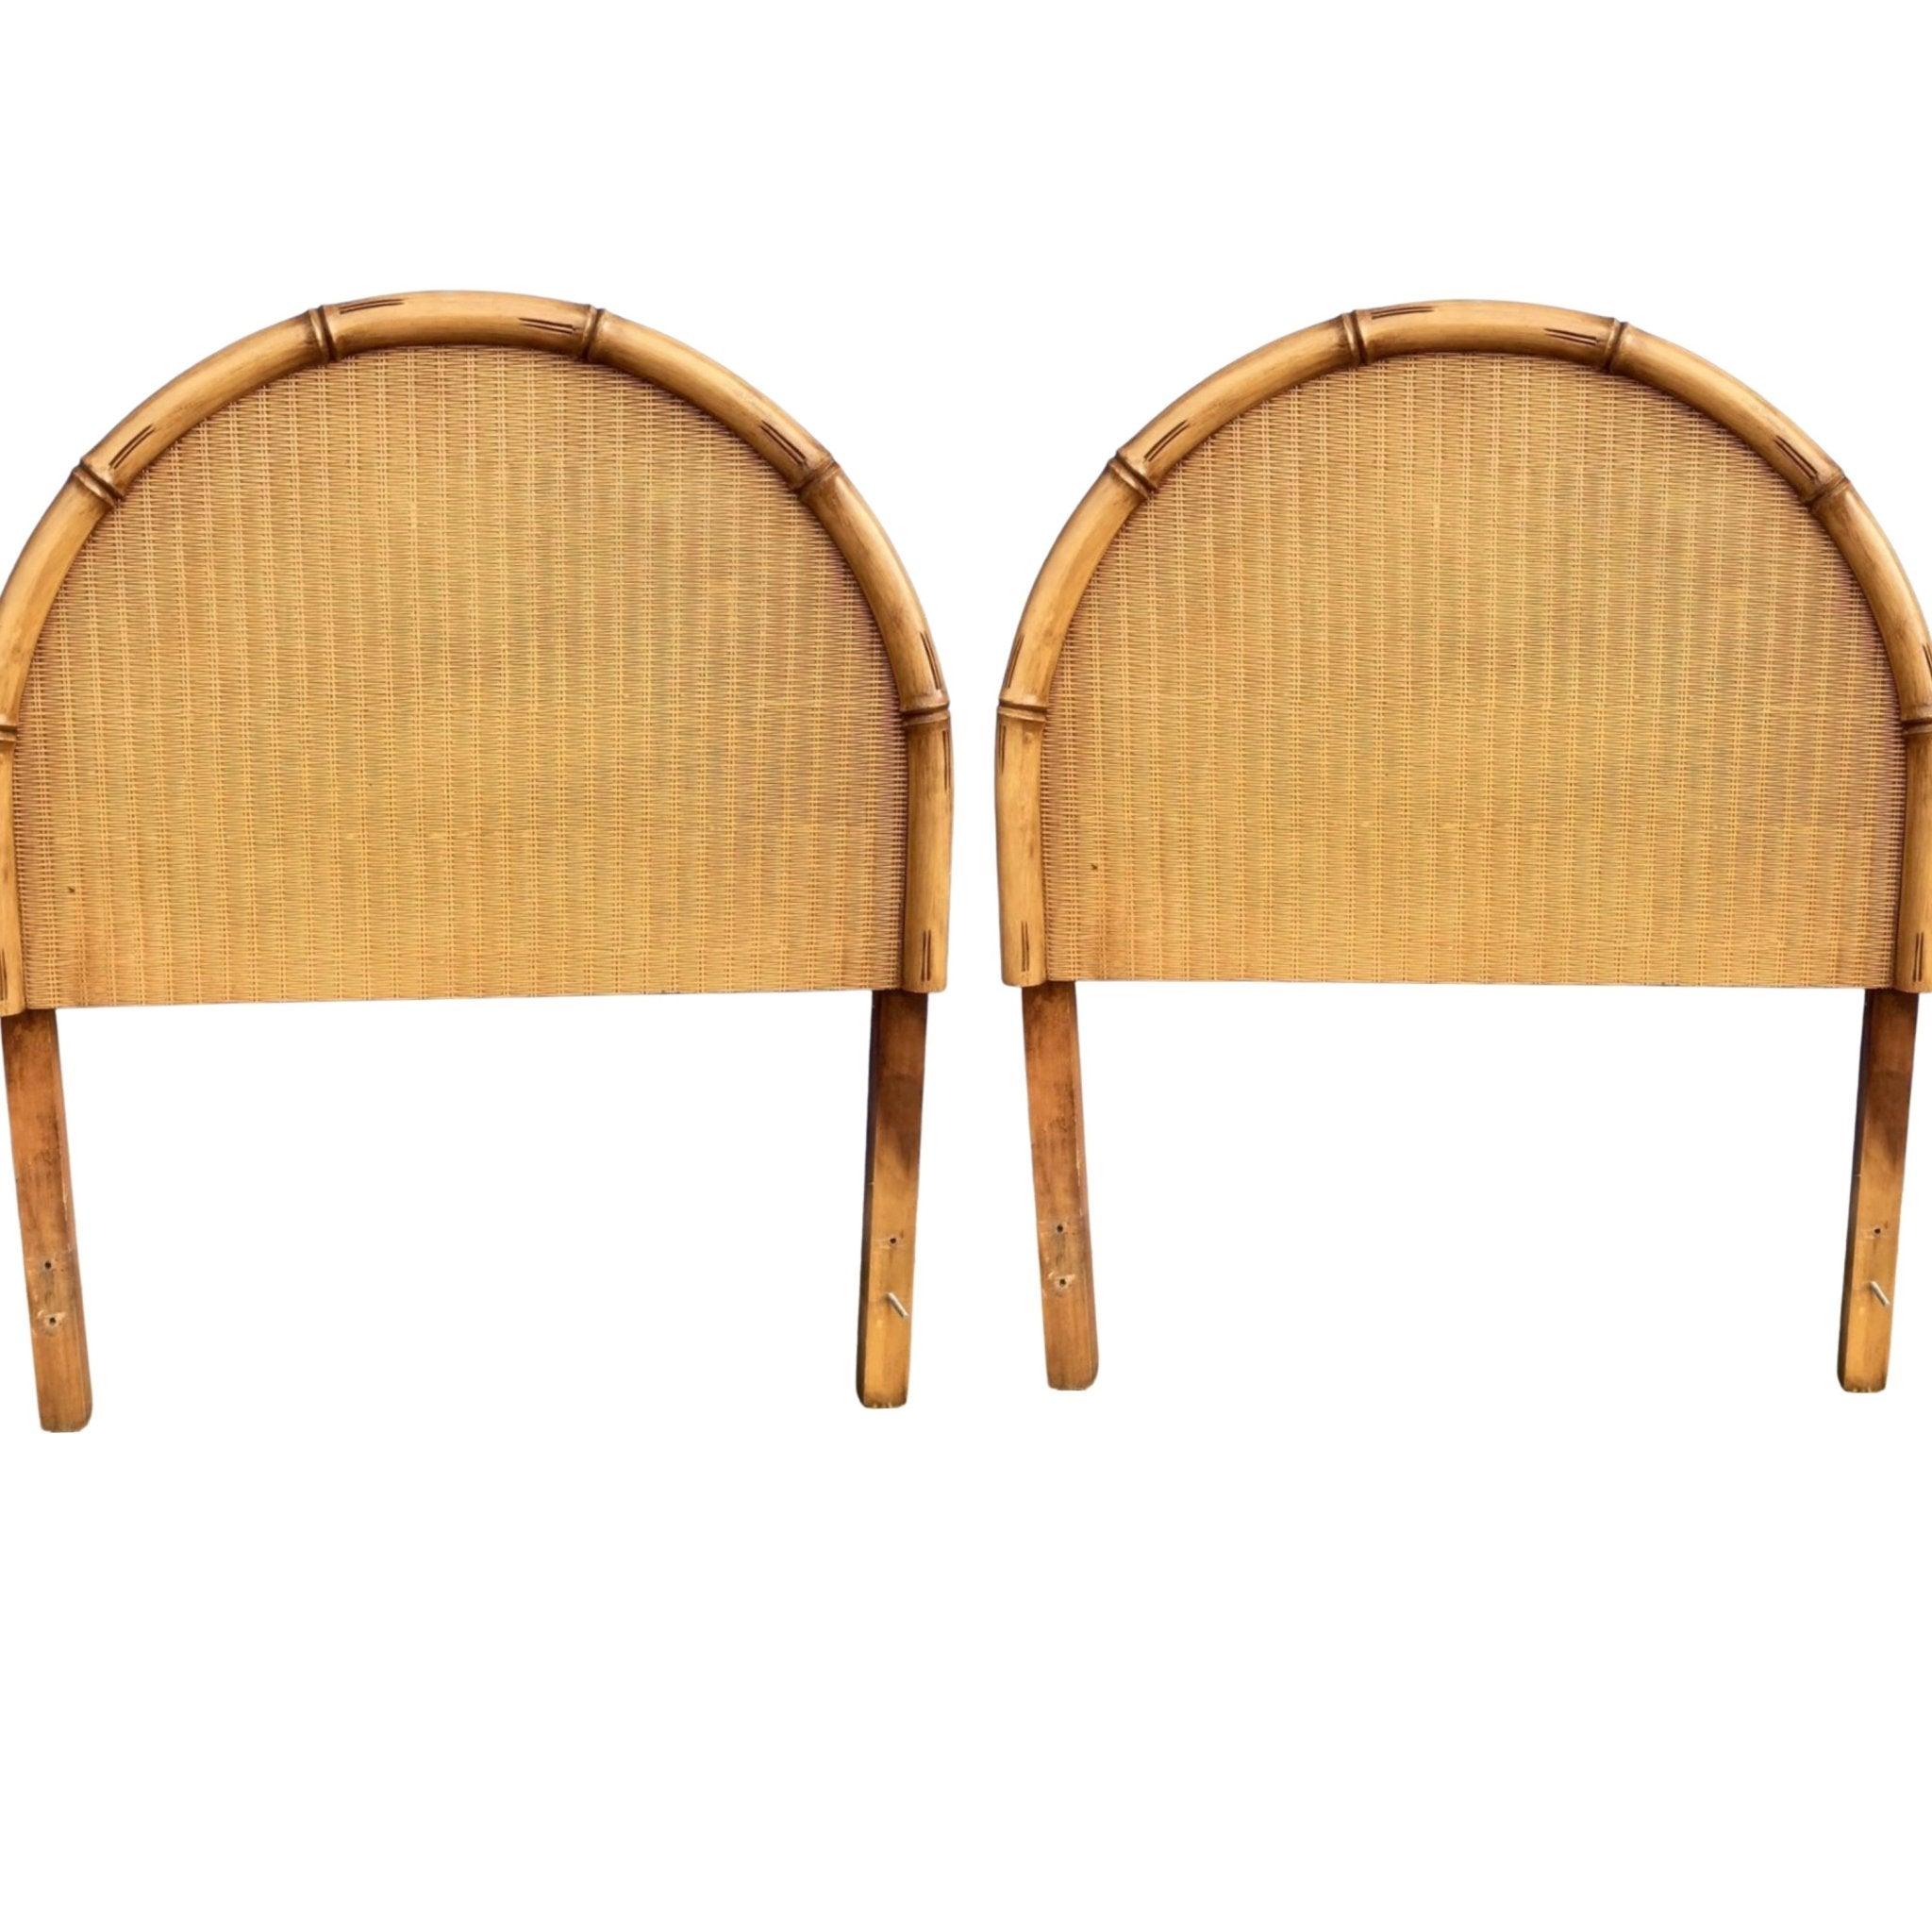 Vintage Faux Bamboo Broyhill Twin Headboards Available for Lacquer - Hibiscus House